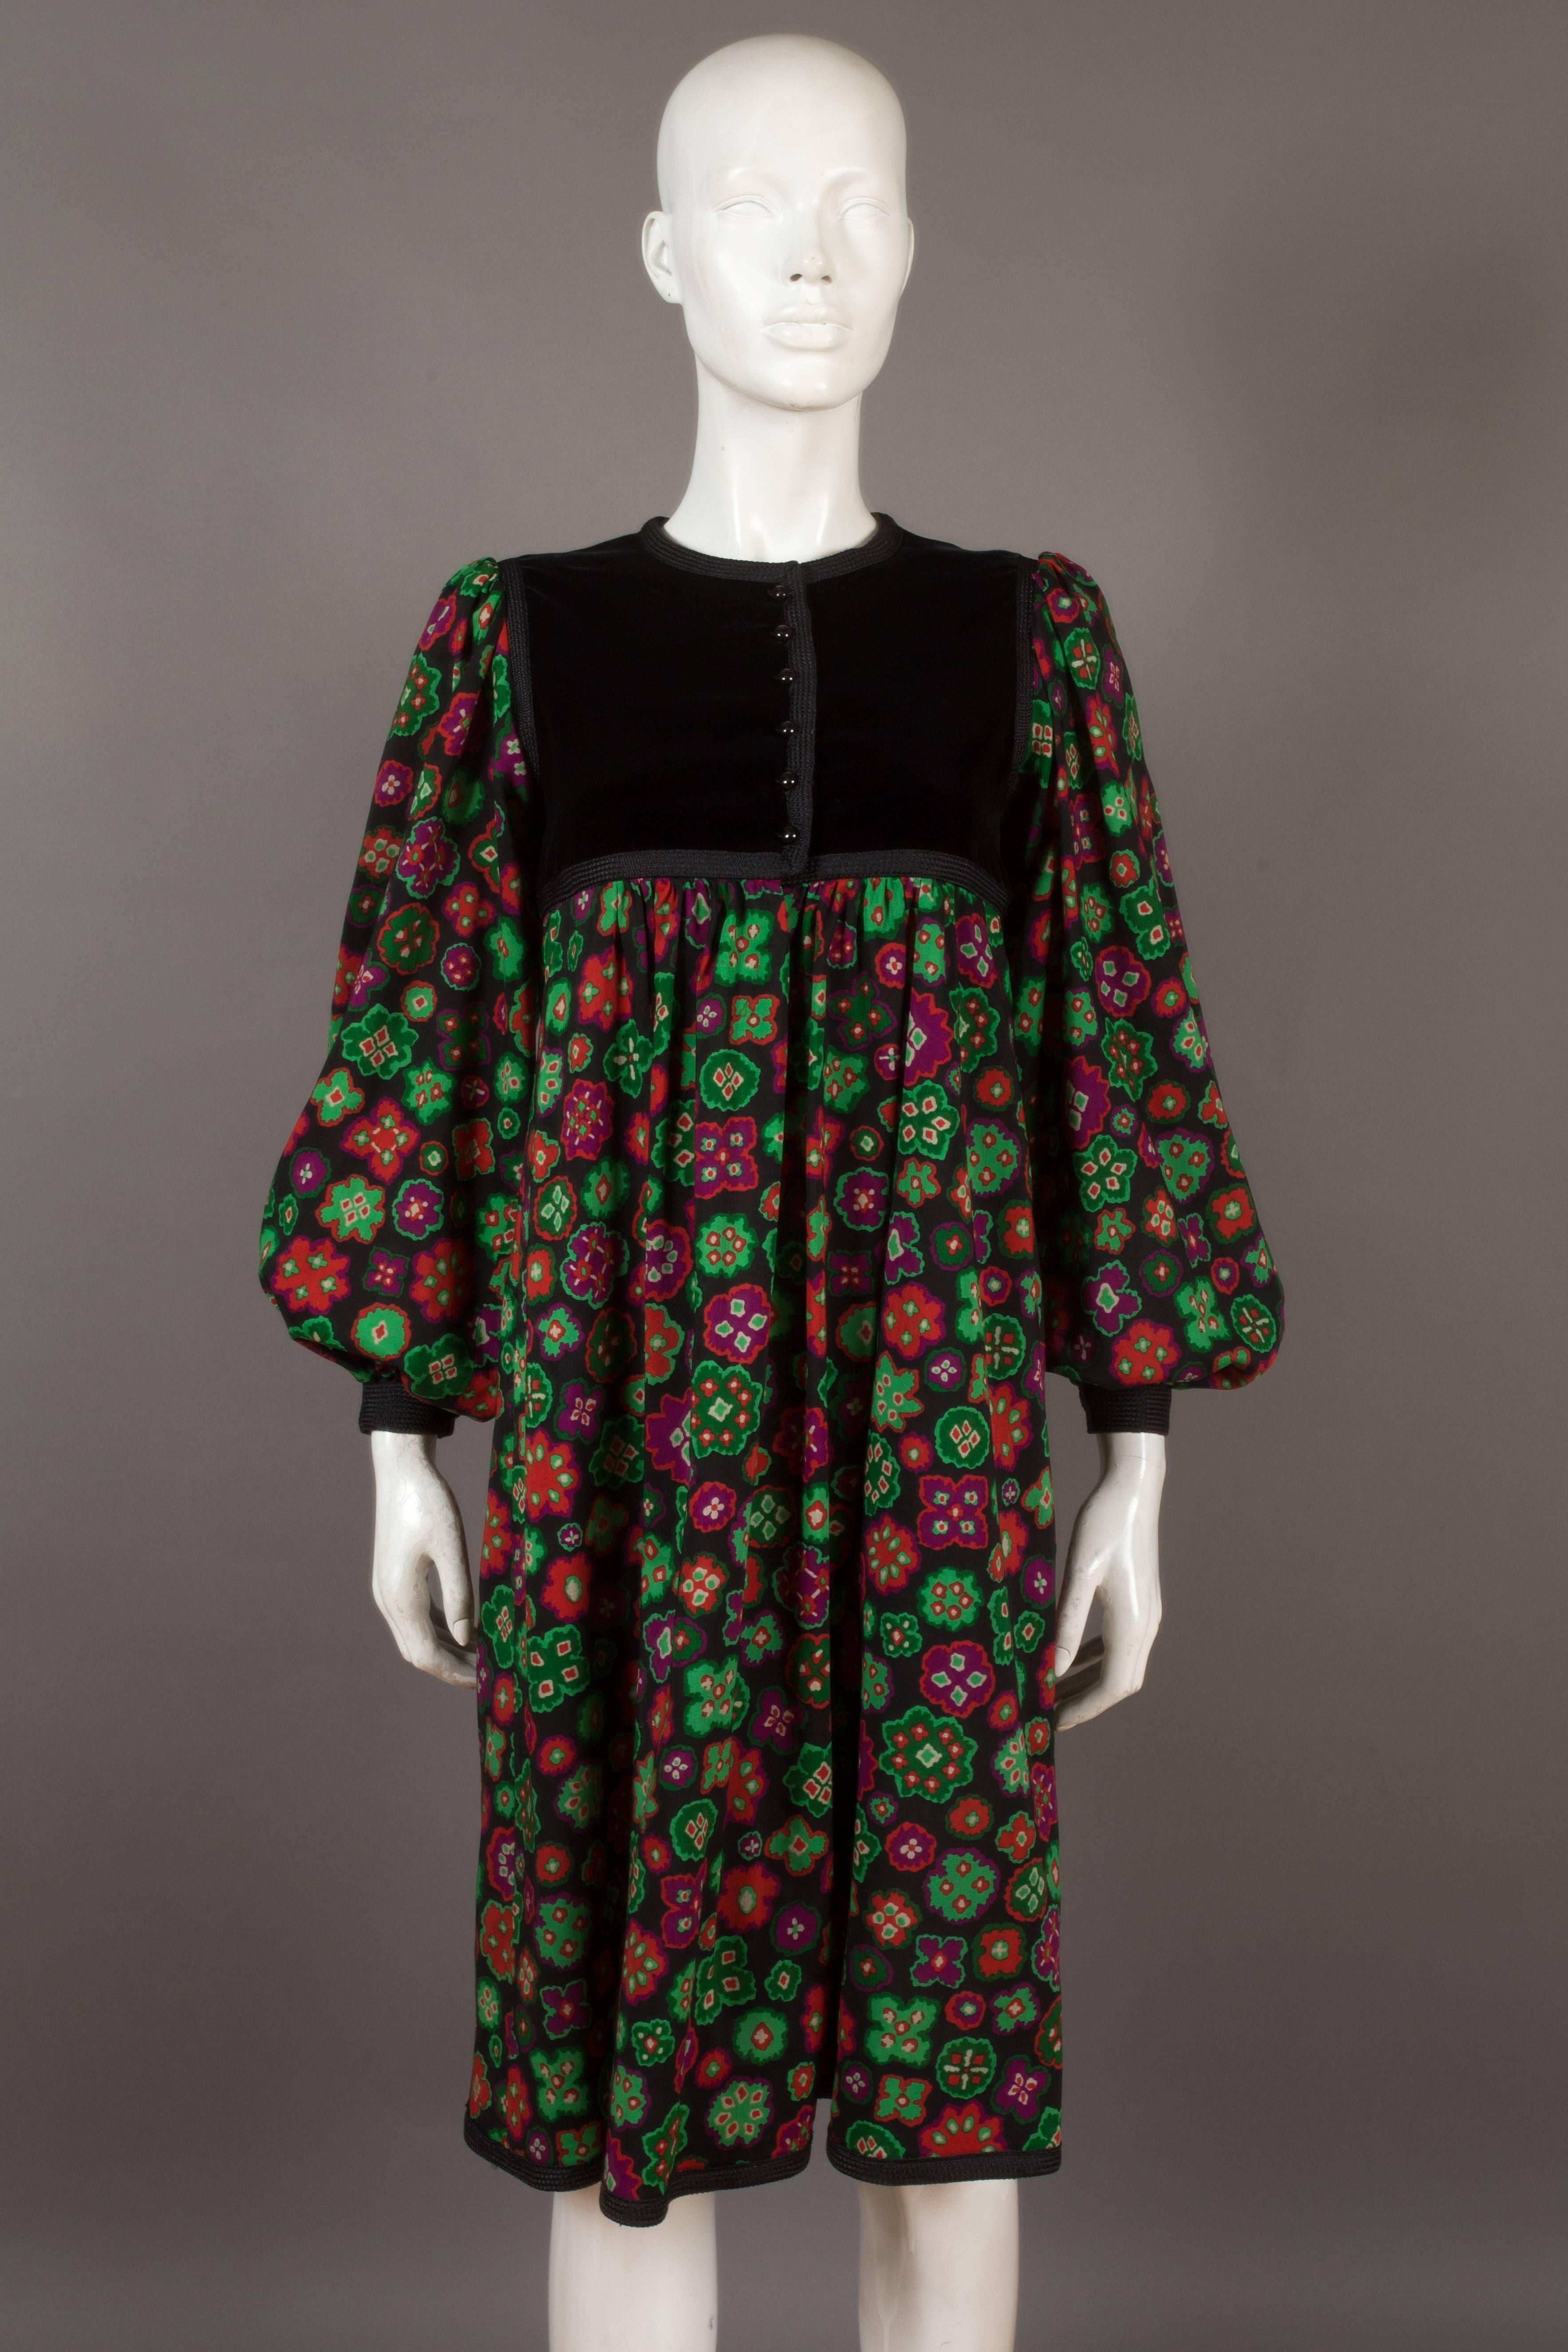 A Yves Saint Laurent 'Rive Gauche' folk dress, circa 1976. 

Black velvet bodice yolk, braided trim, button closure, pleated bishop sleeves, two hidden pockets, full pleated skirt falling below the knee and a vibrant folkloristic floral print on